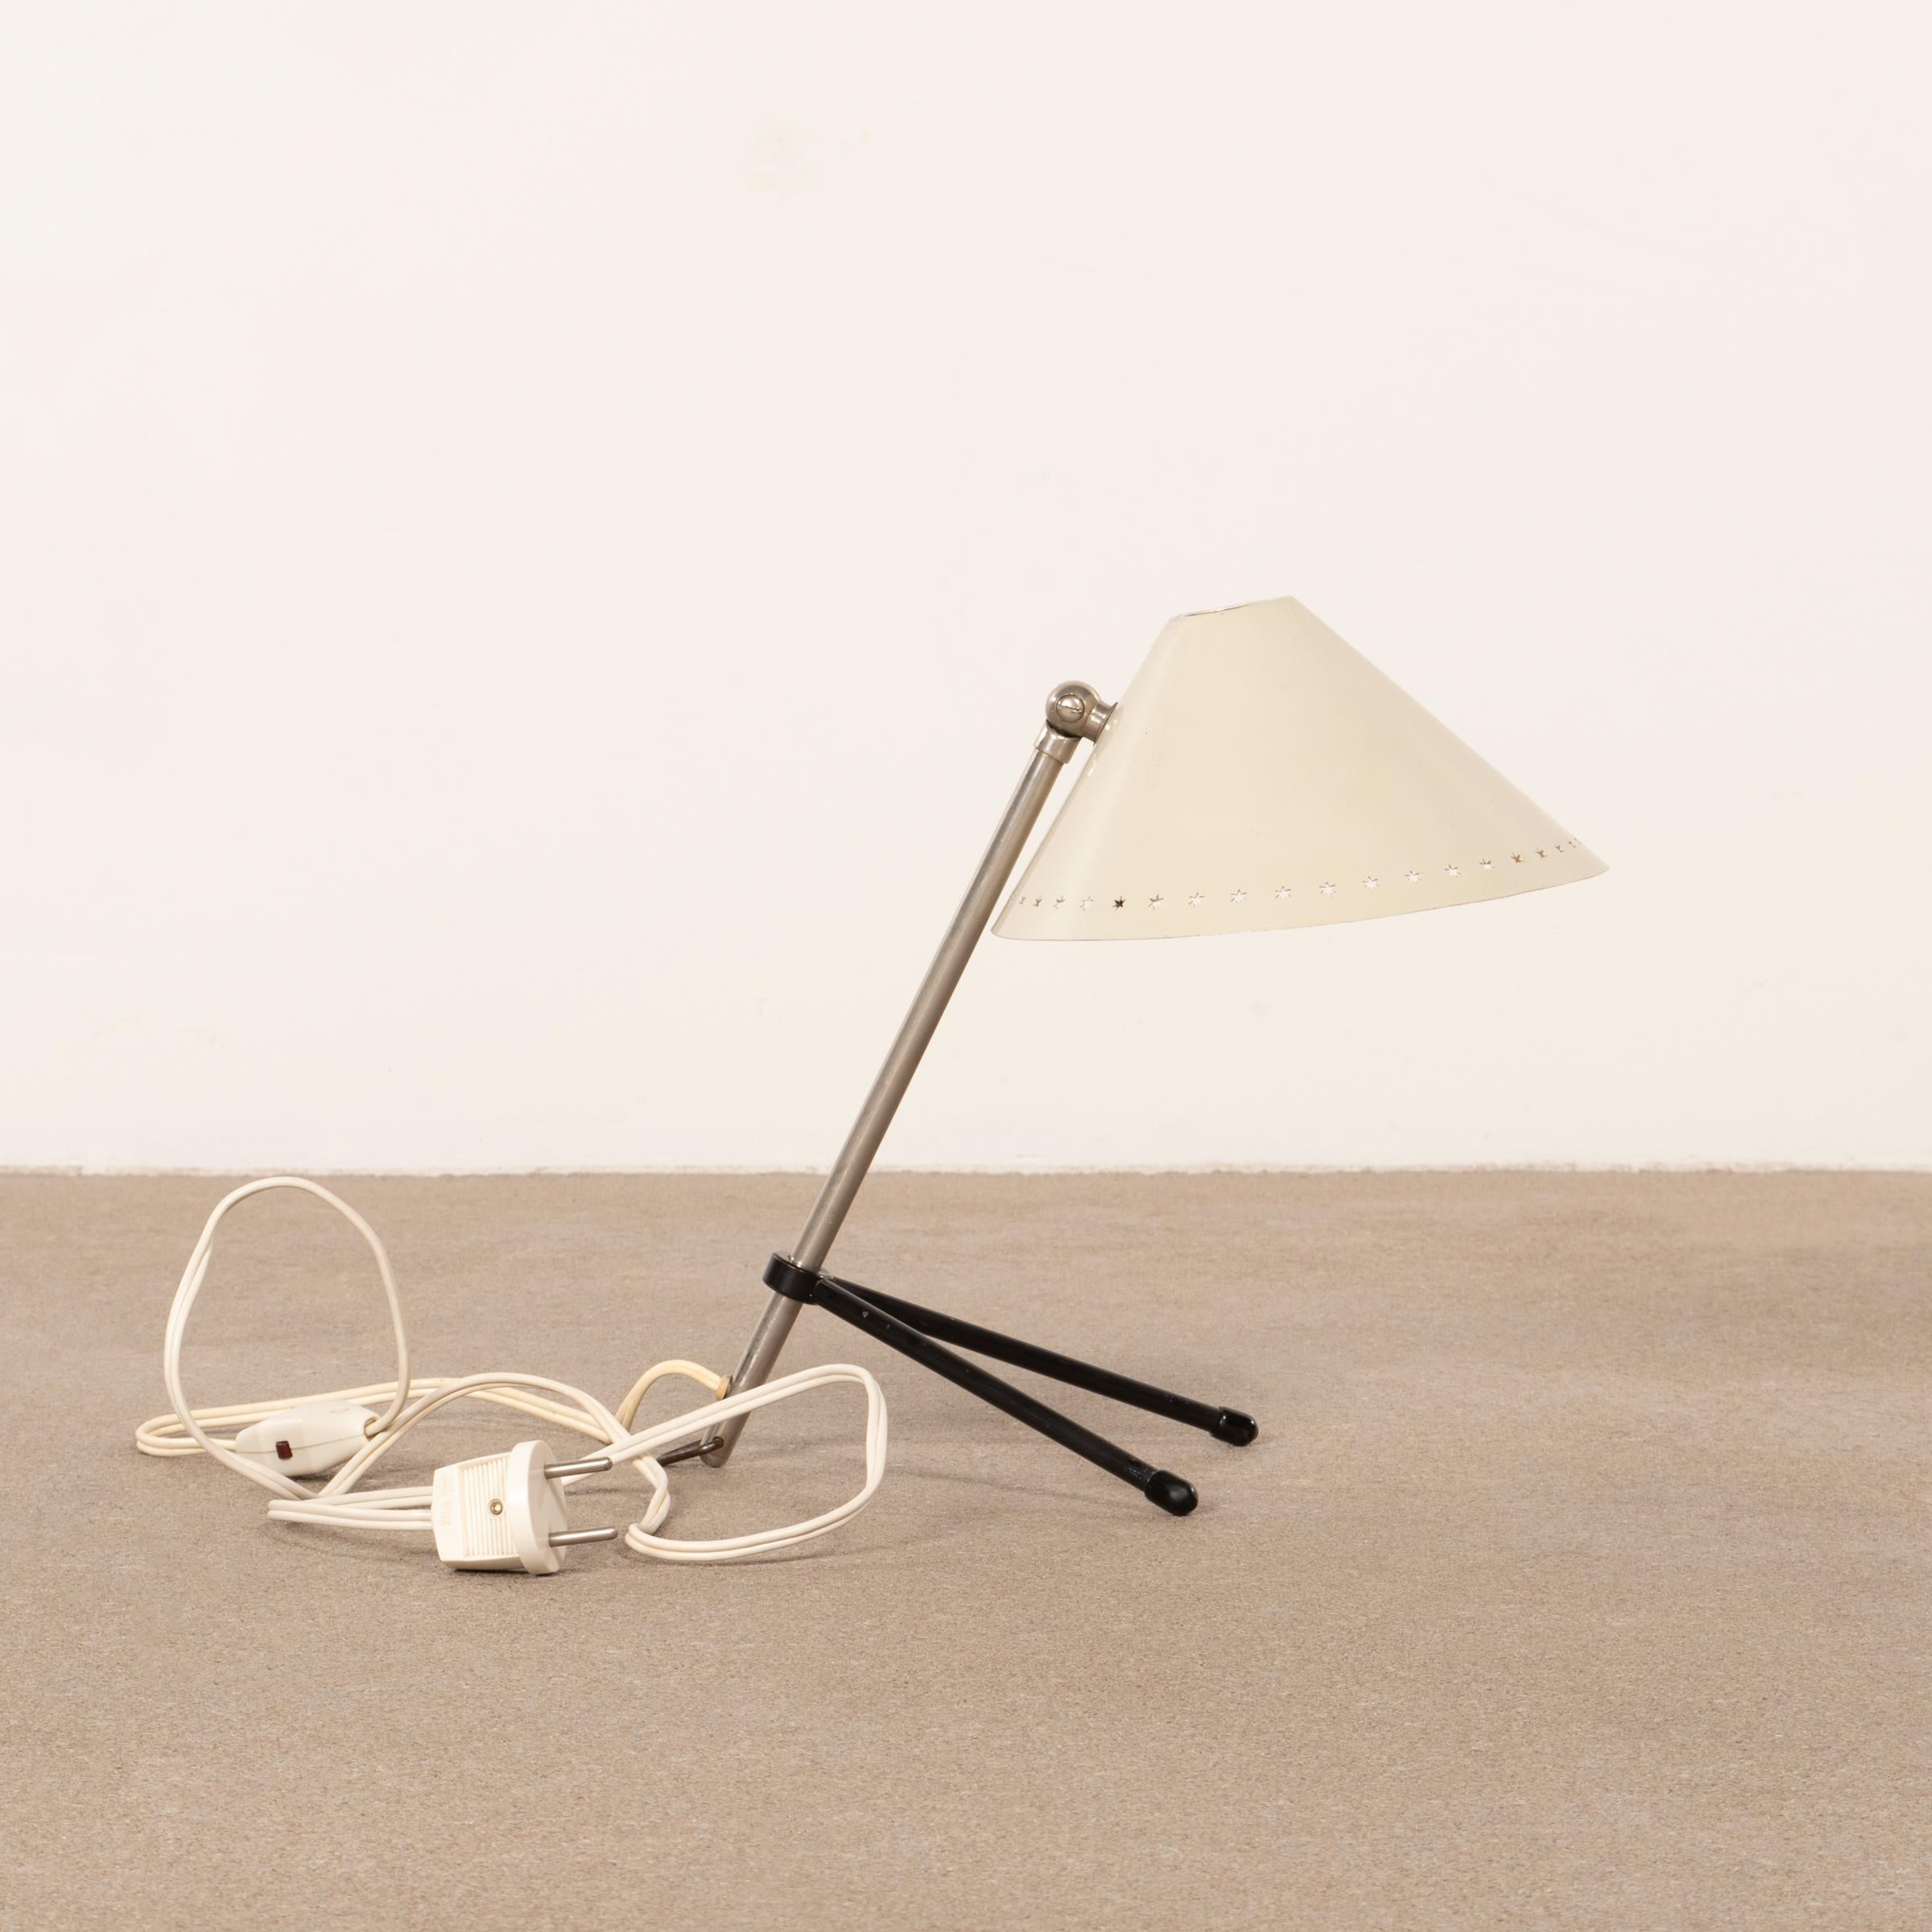 Pinocchio Lamps by H. Busquet for Hala Zeist, Netherlands 10